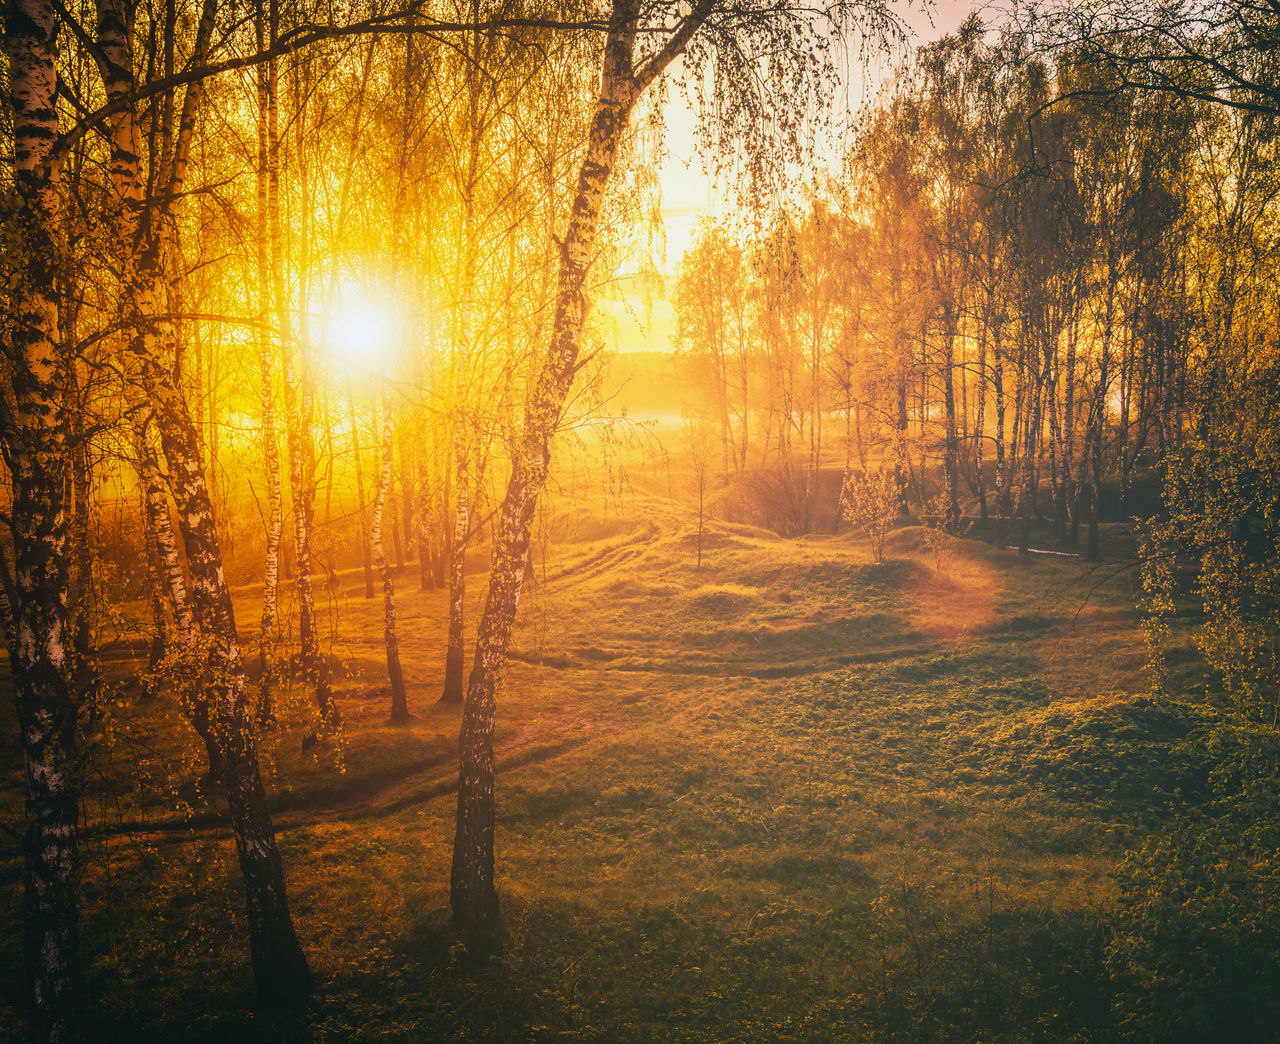 tree, plant, sunlight, morning, nature, beauty in nature, sun, tranquility, sunbeam, land, tranquil scene, forest, scenics - nature, sky, reflection, no people, environment, sunrise, orange color, landscape, light, lens flare, idyllic, back lit, non-urban scene, mist, outdoors, growth, woodland, fog, autumn, water, dawn, branch, natural environment, tree trunk, trunk, silhouette